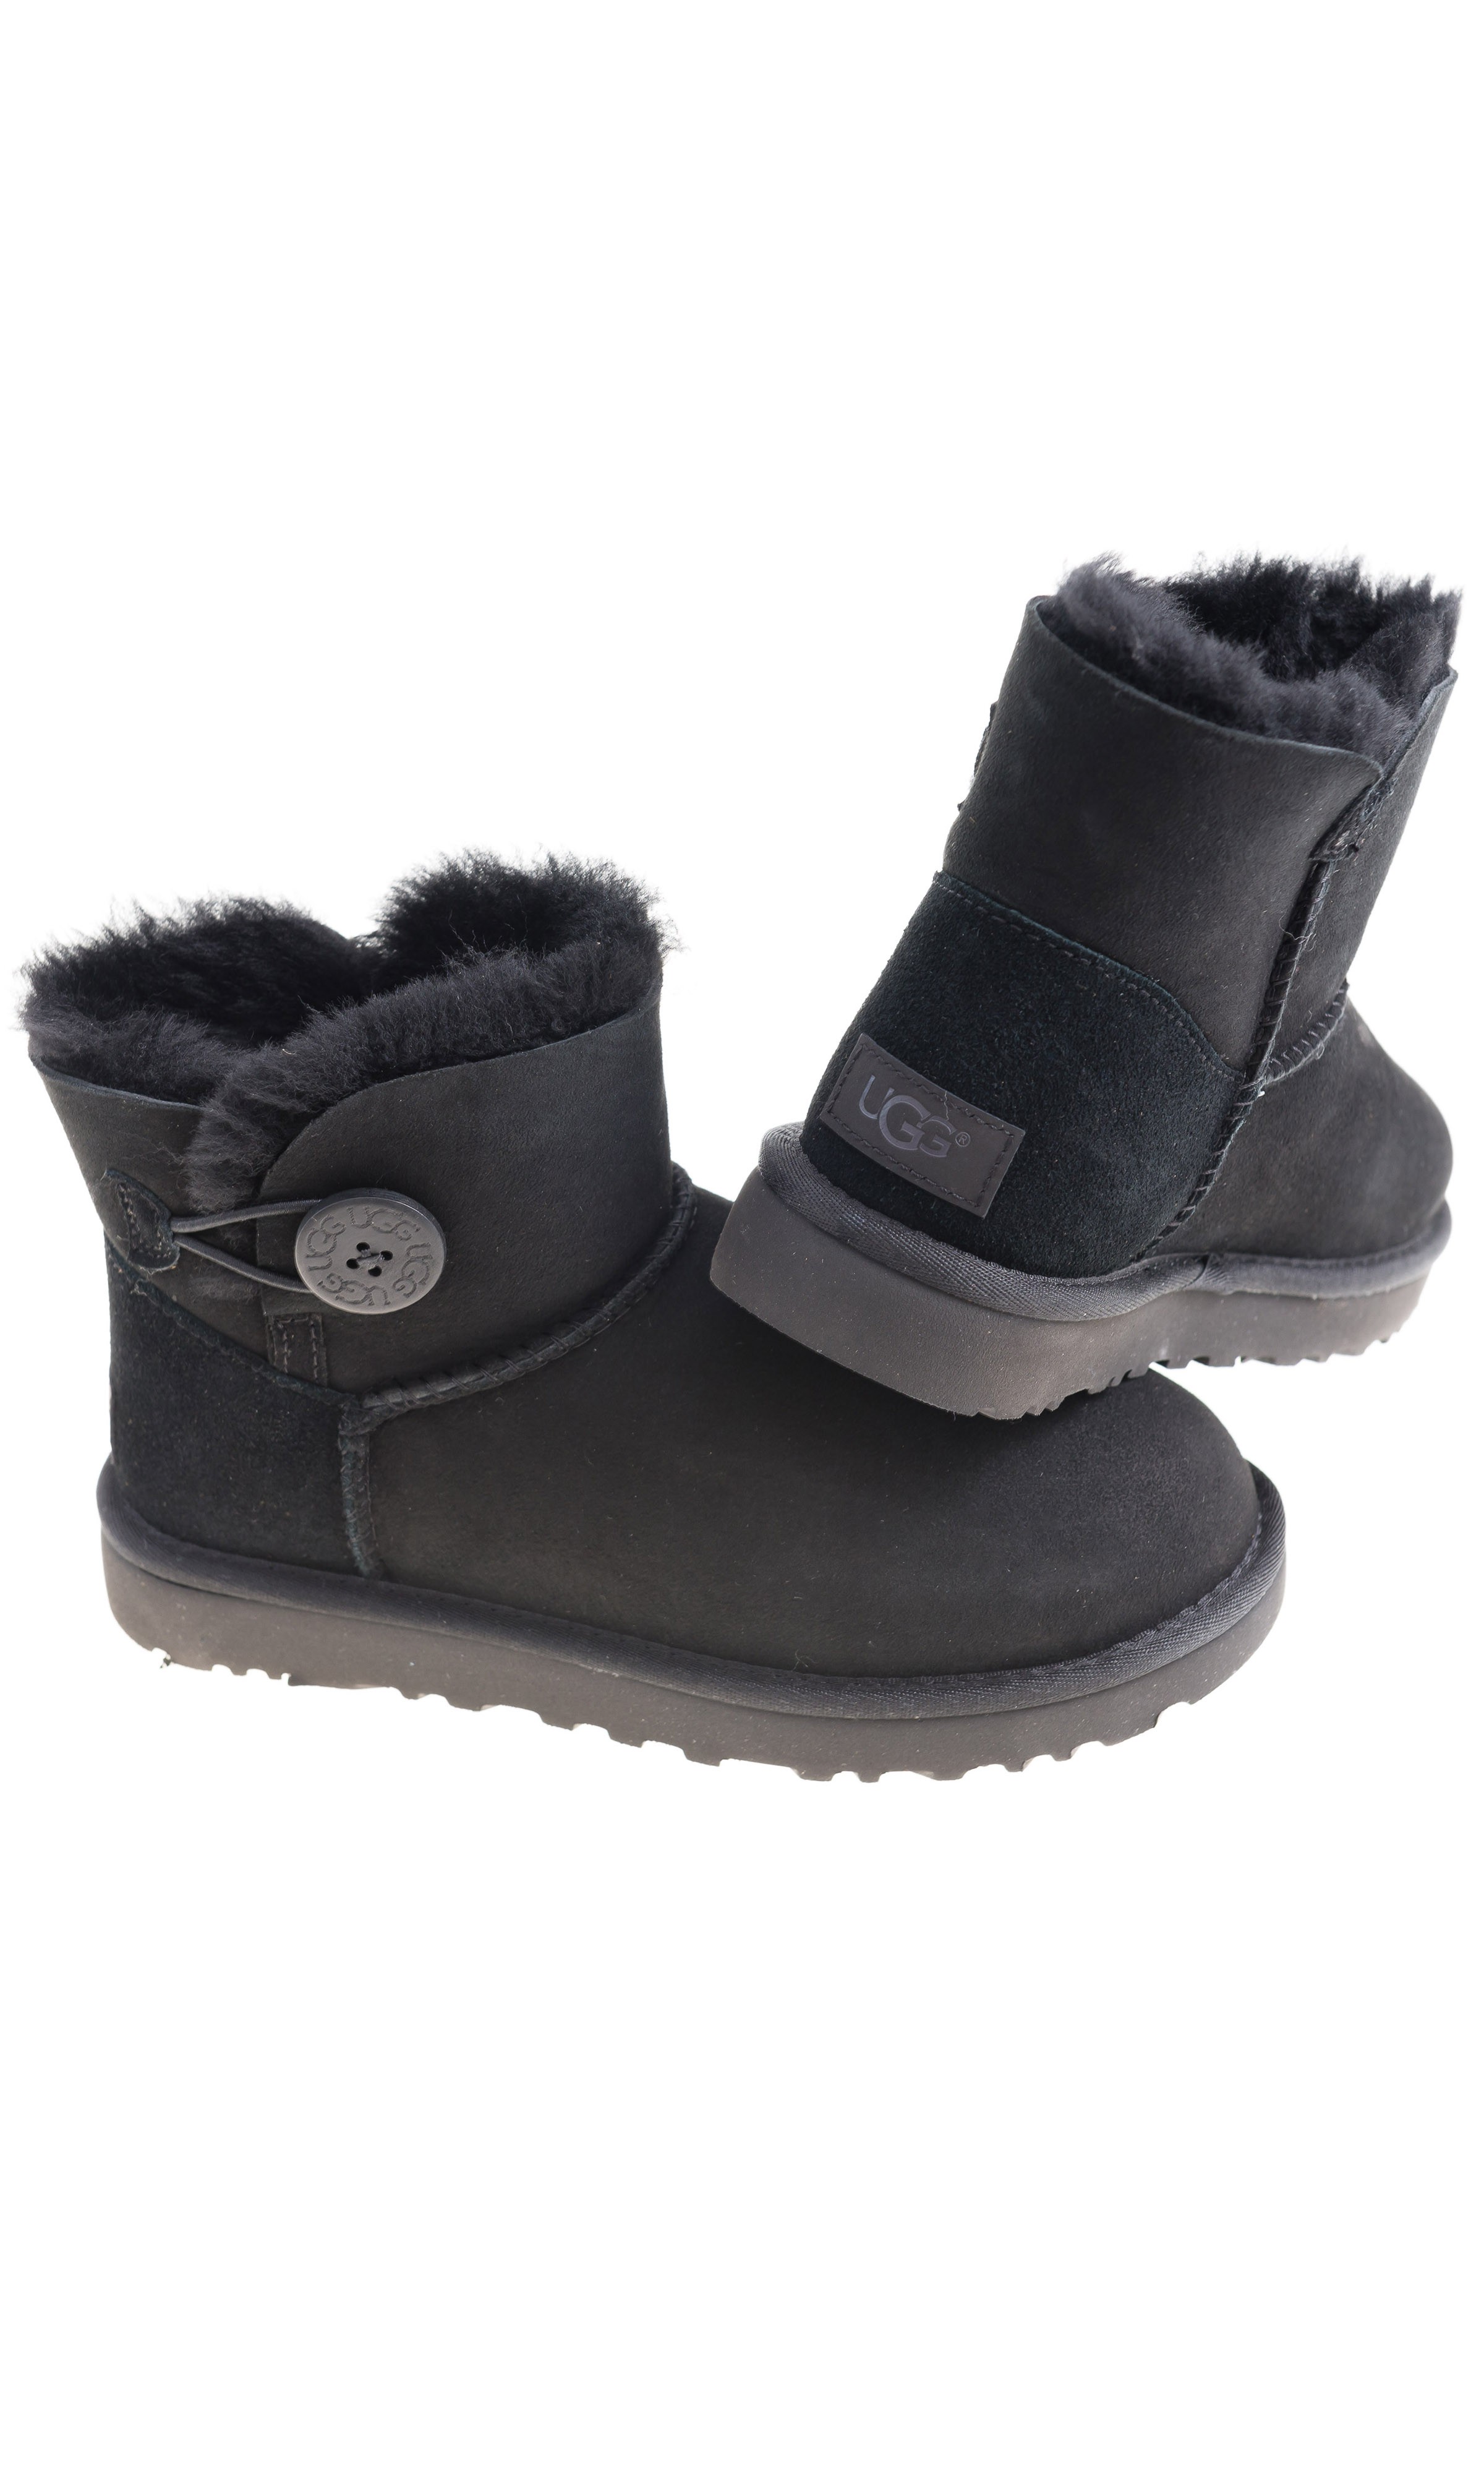 ugg boots with buttons on side